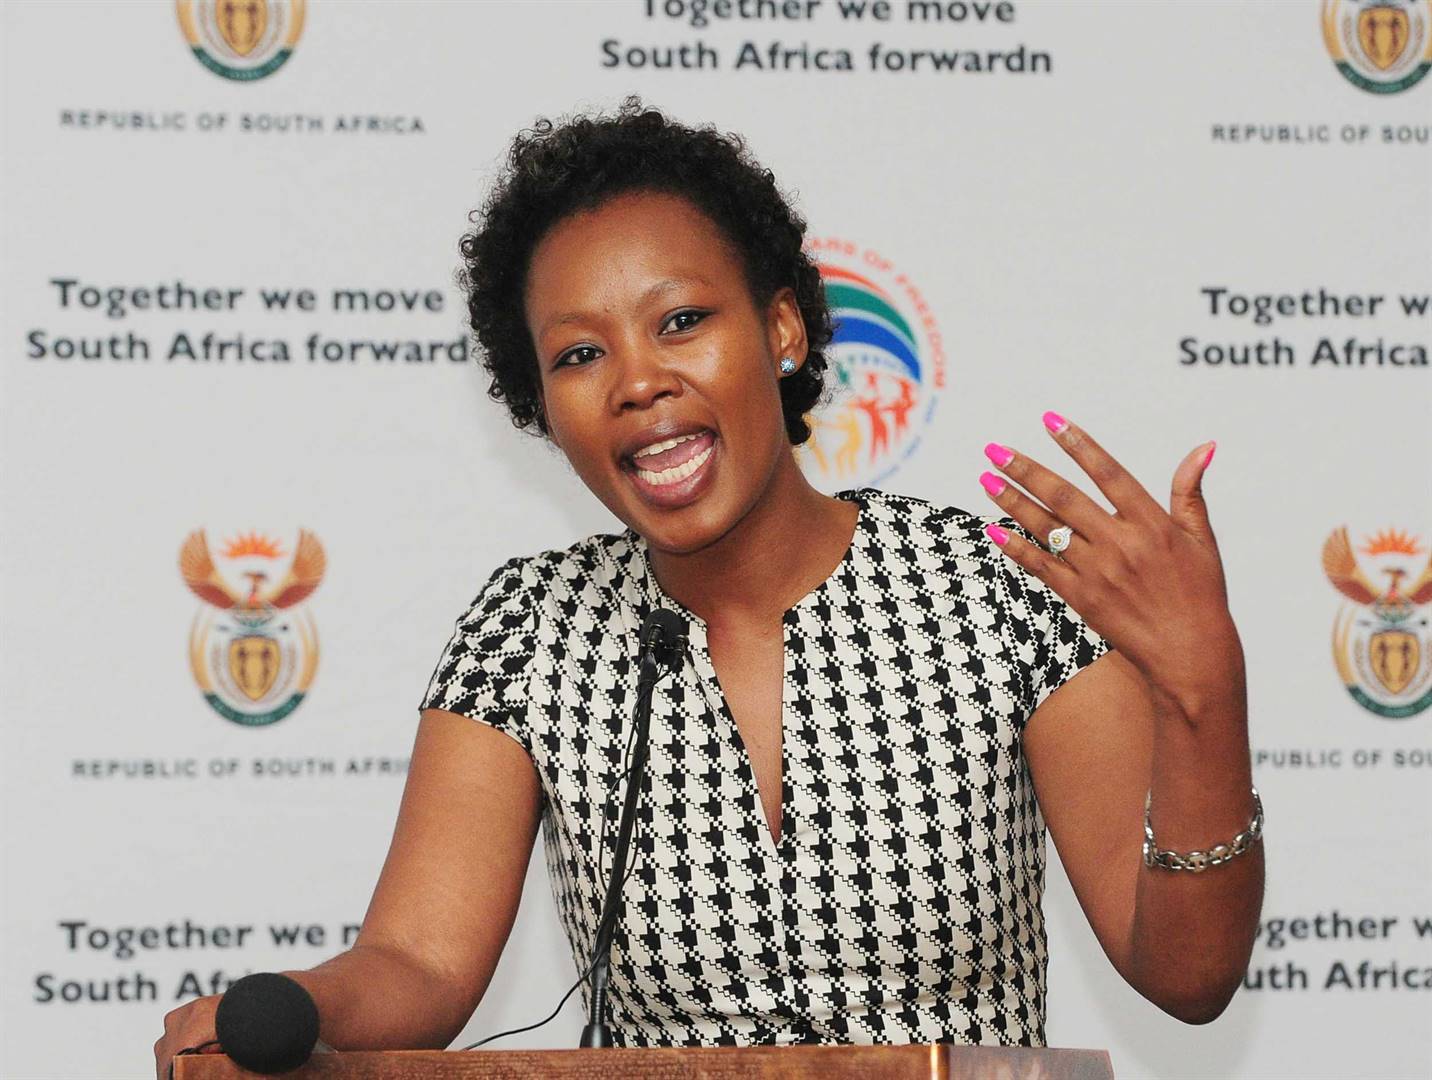 President Cyril Ramaphosa will be meeting with Communications, Telecommunications and Postal Services Minister Stella Ndabeni-Abrahams to discuss a social media post which shows her supposedly breaking lockdown regulations